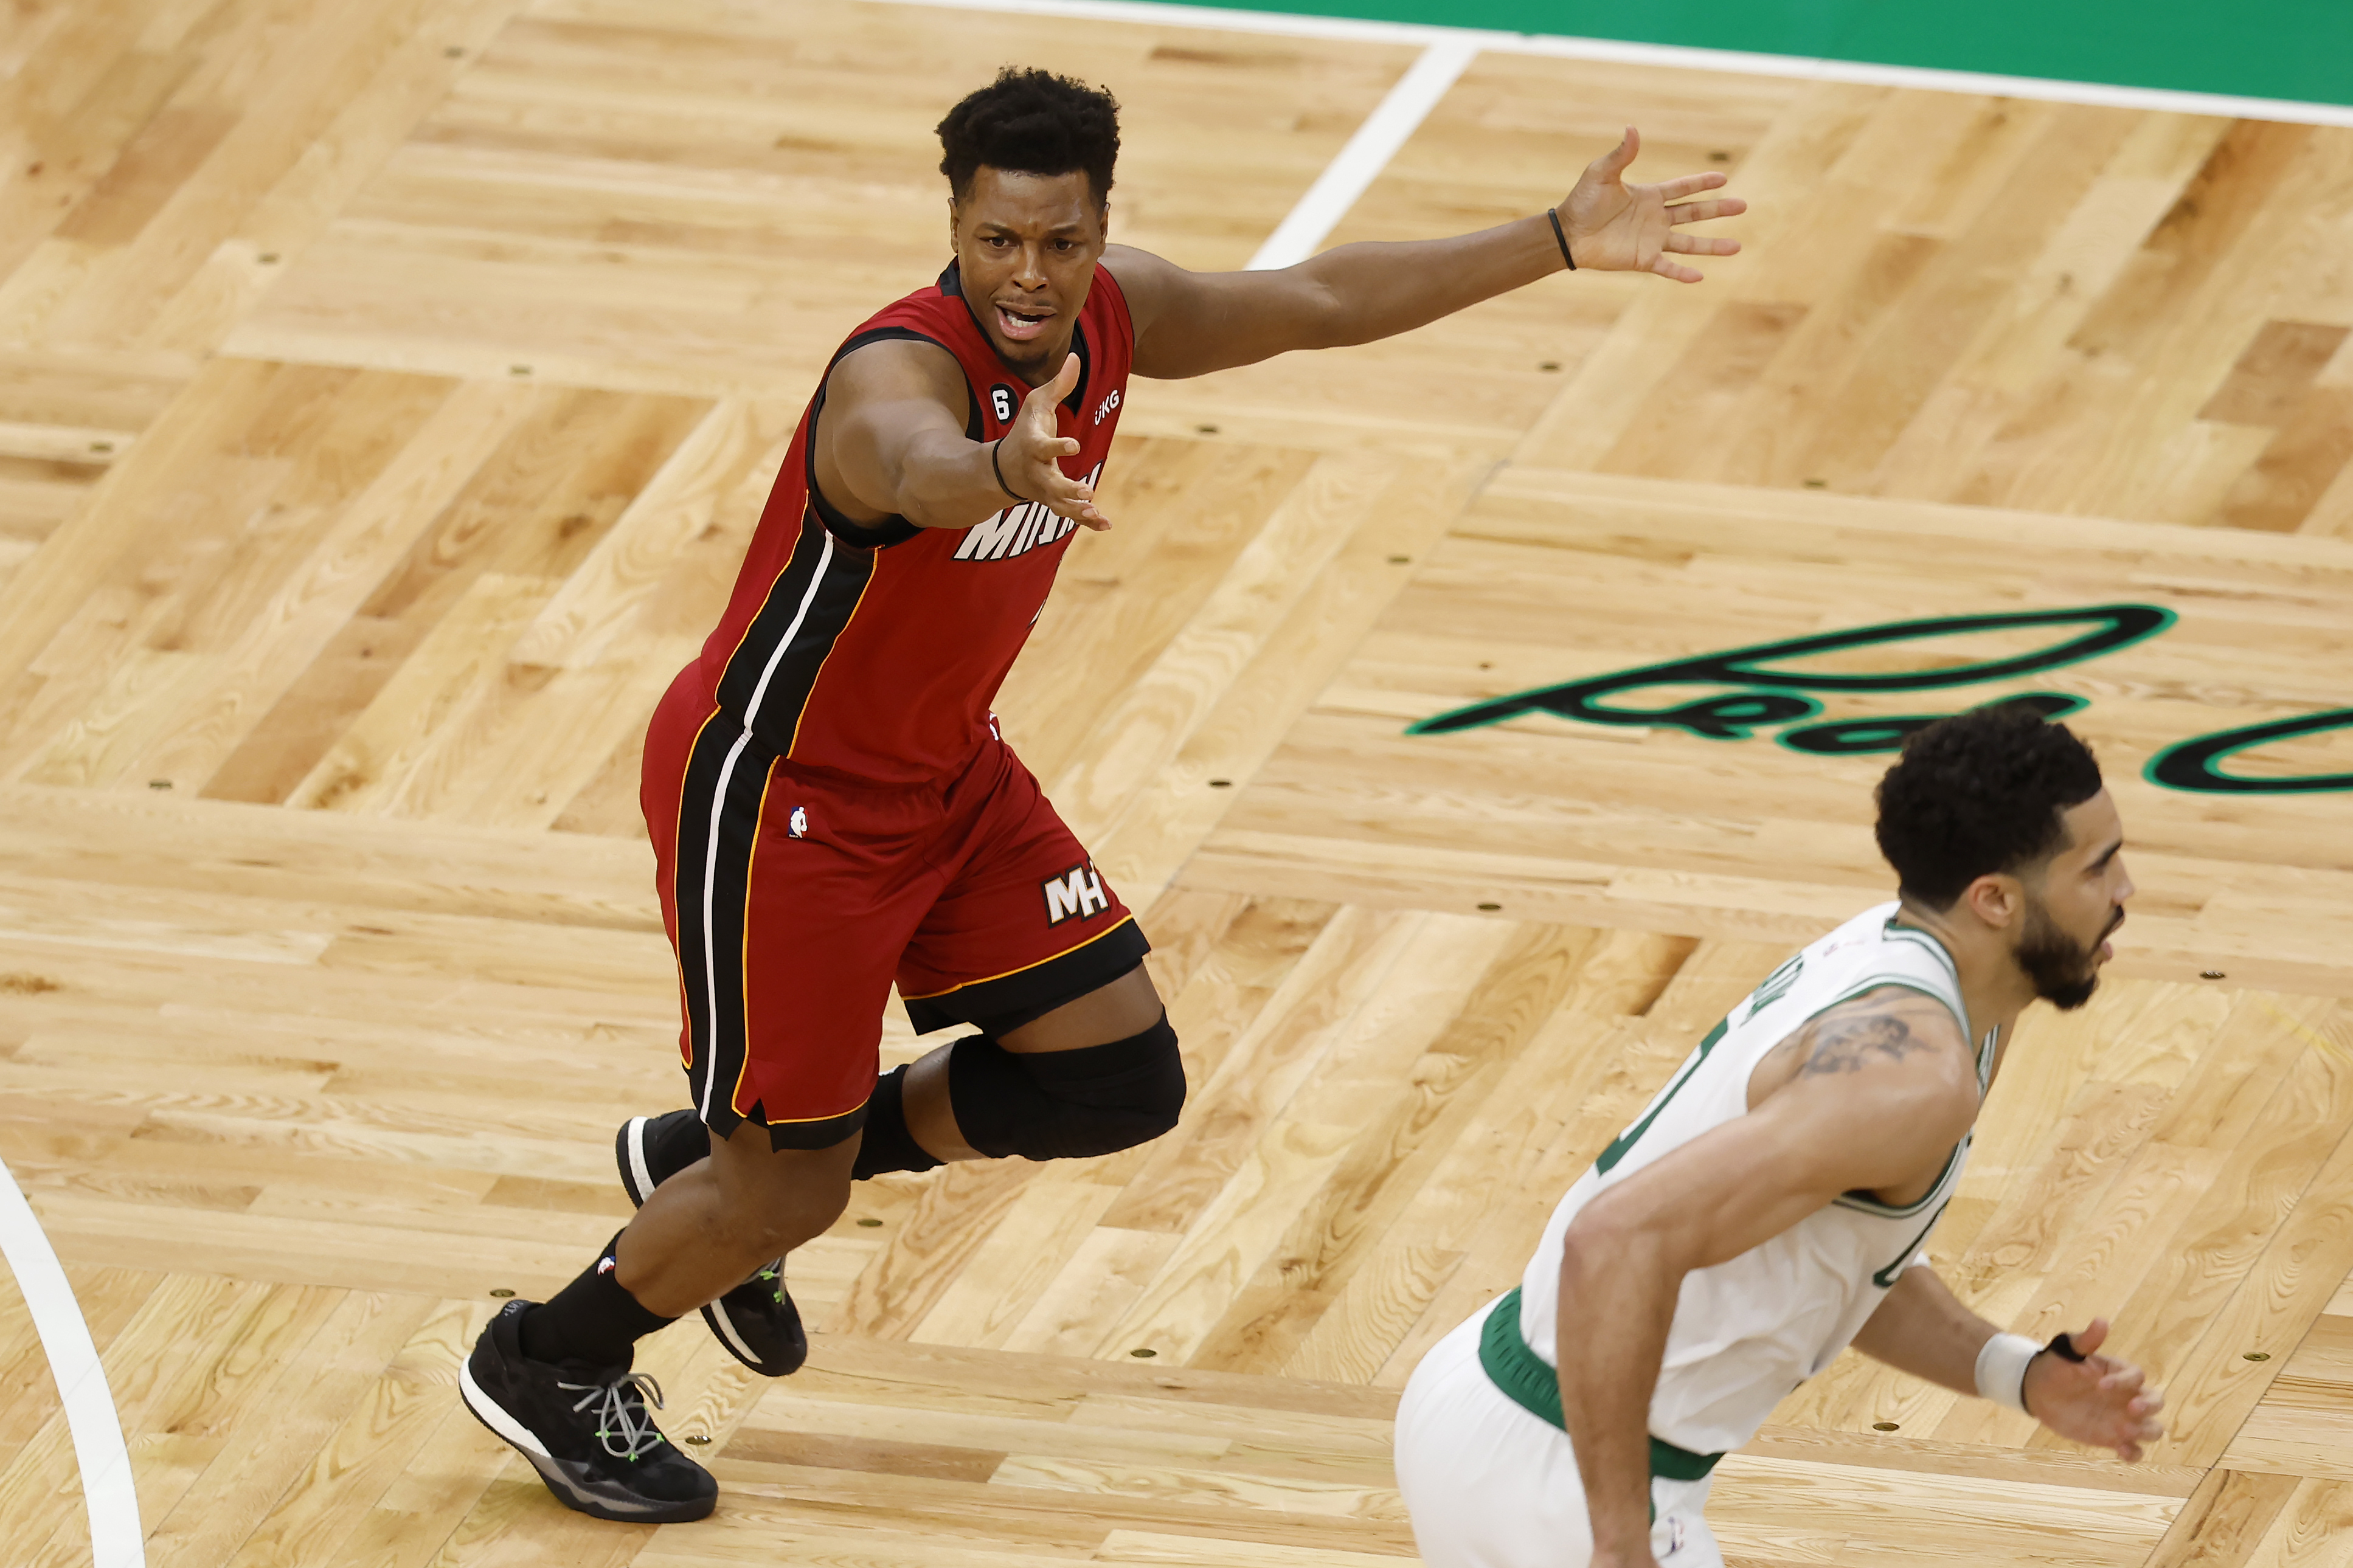 Heat win in Boston again to take 2-0 Eastern Conference finals lead